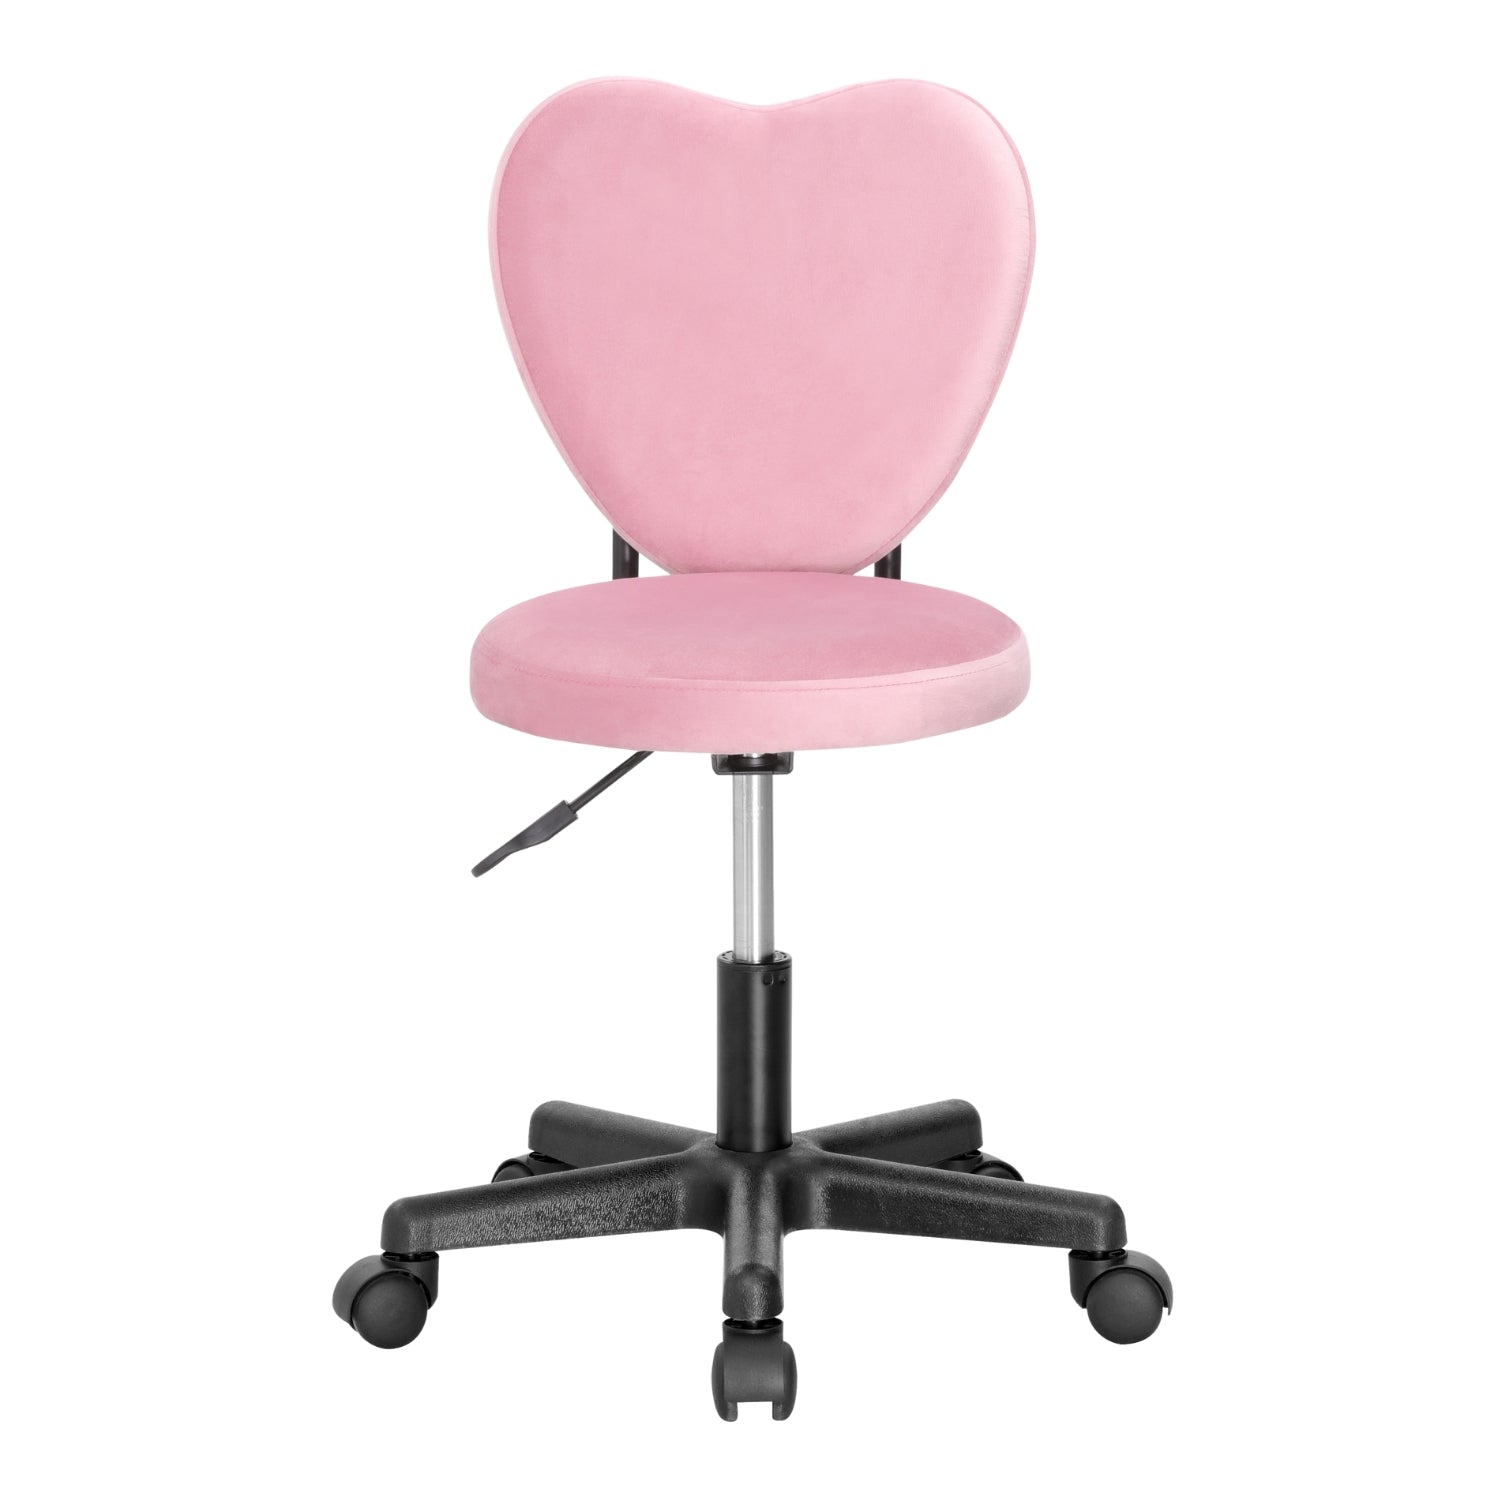 Chatka pink heart shaped chair with wheels perfect for adding a touch of love and mobility to any space.